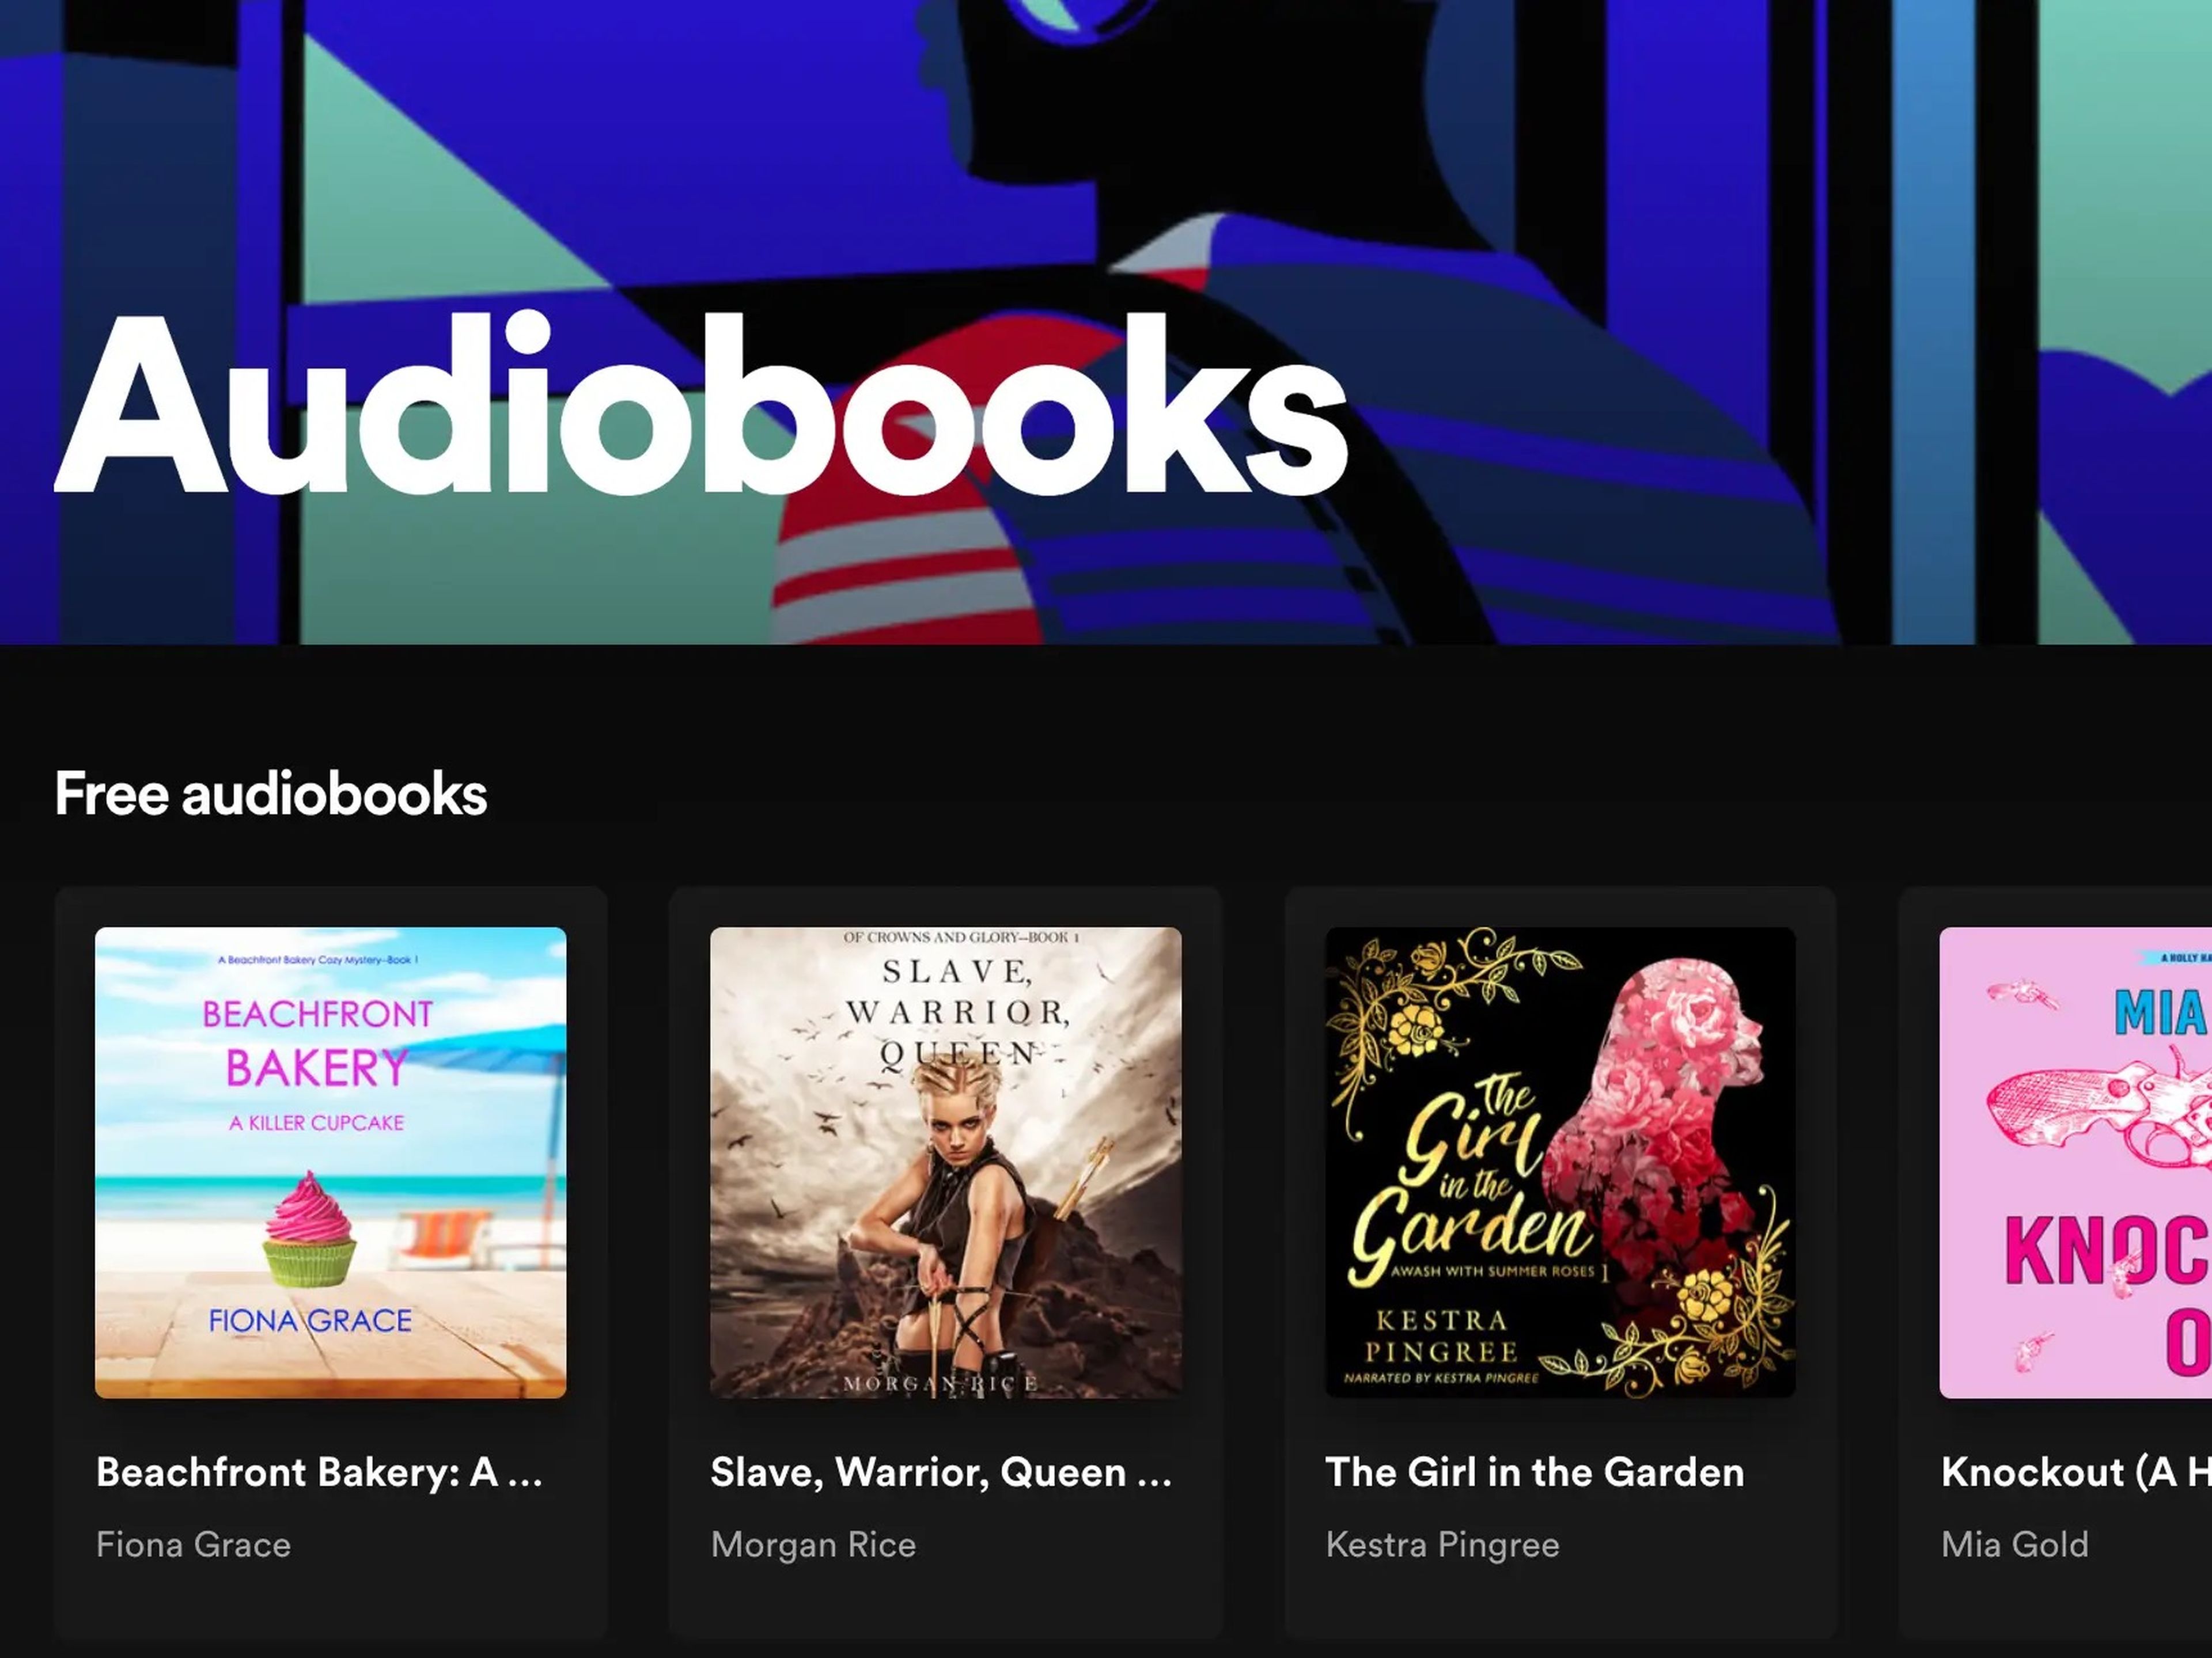 Spotify's audiobook home page